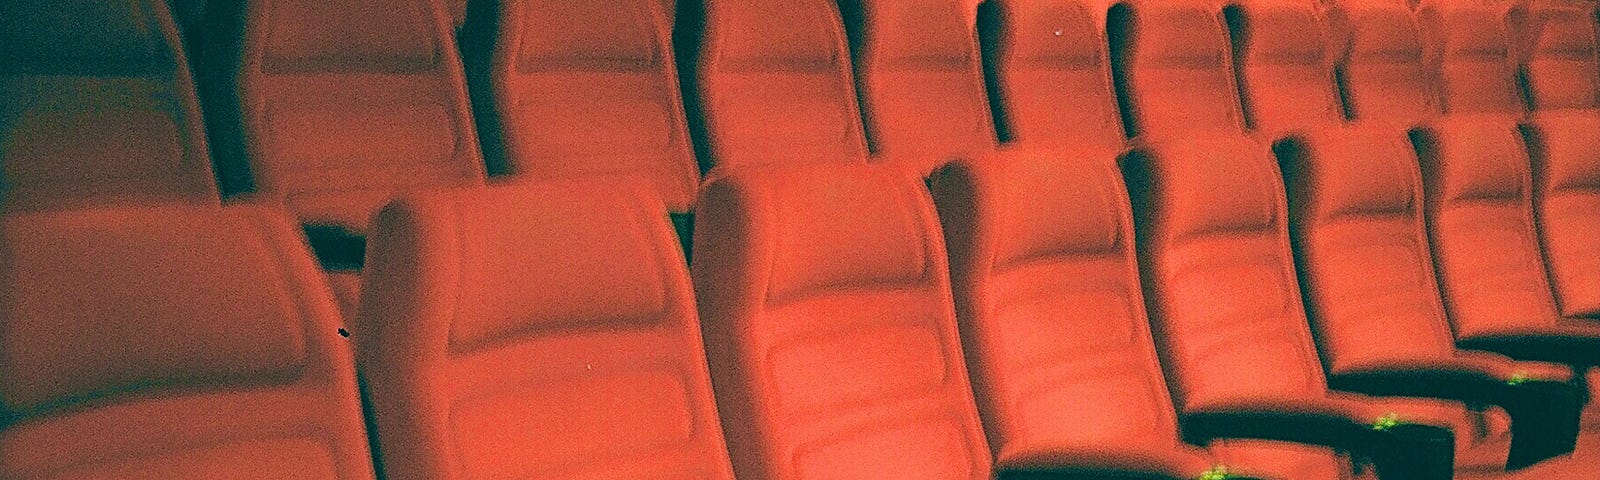 Several rows of red movie theater chairs